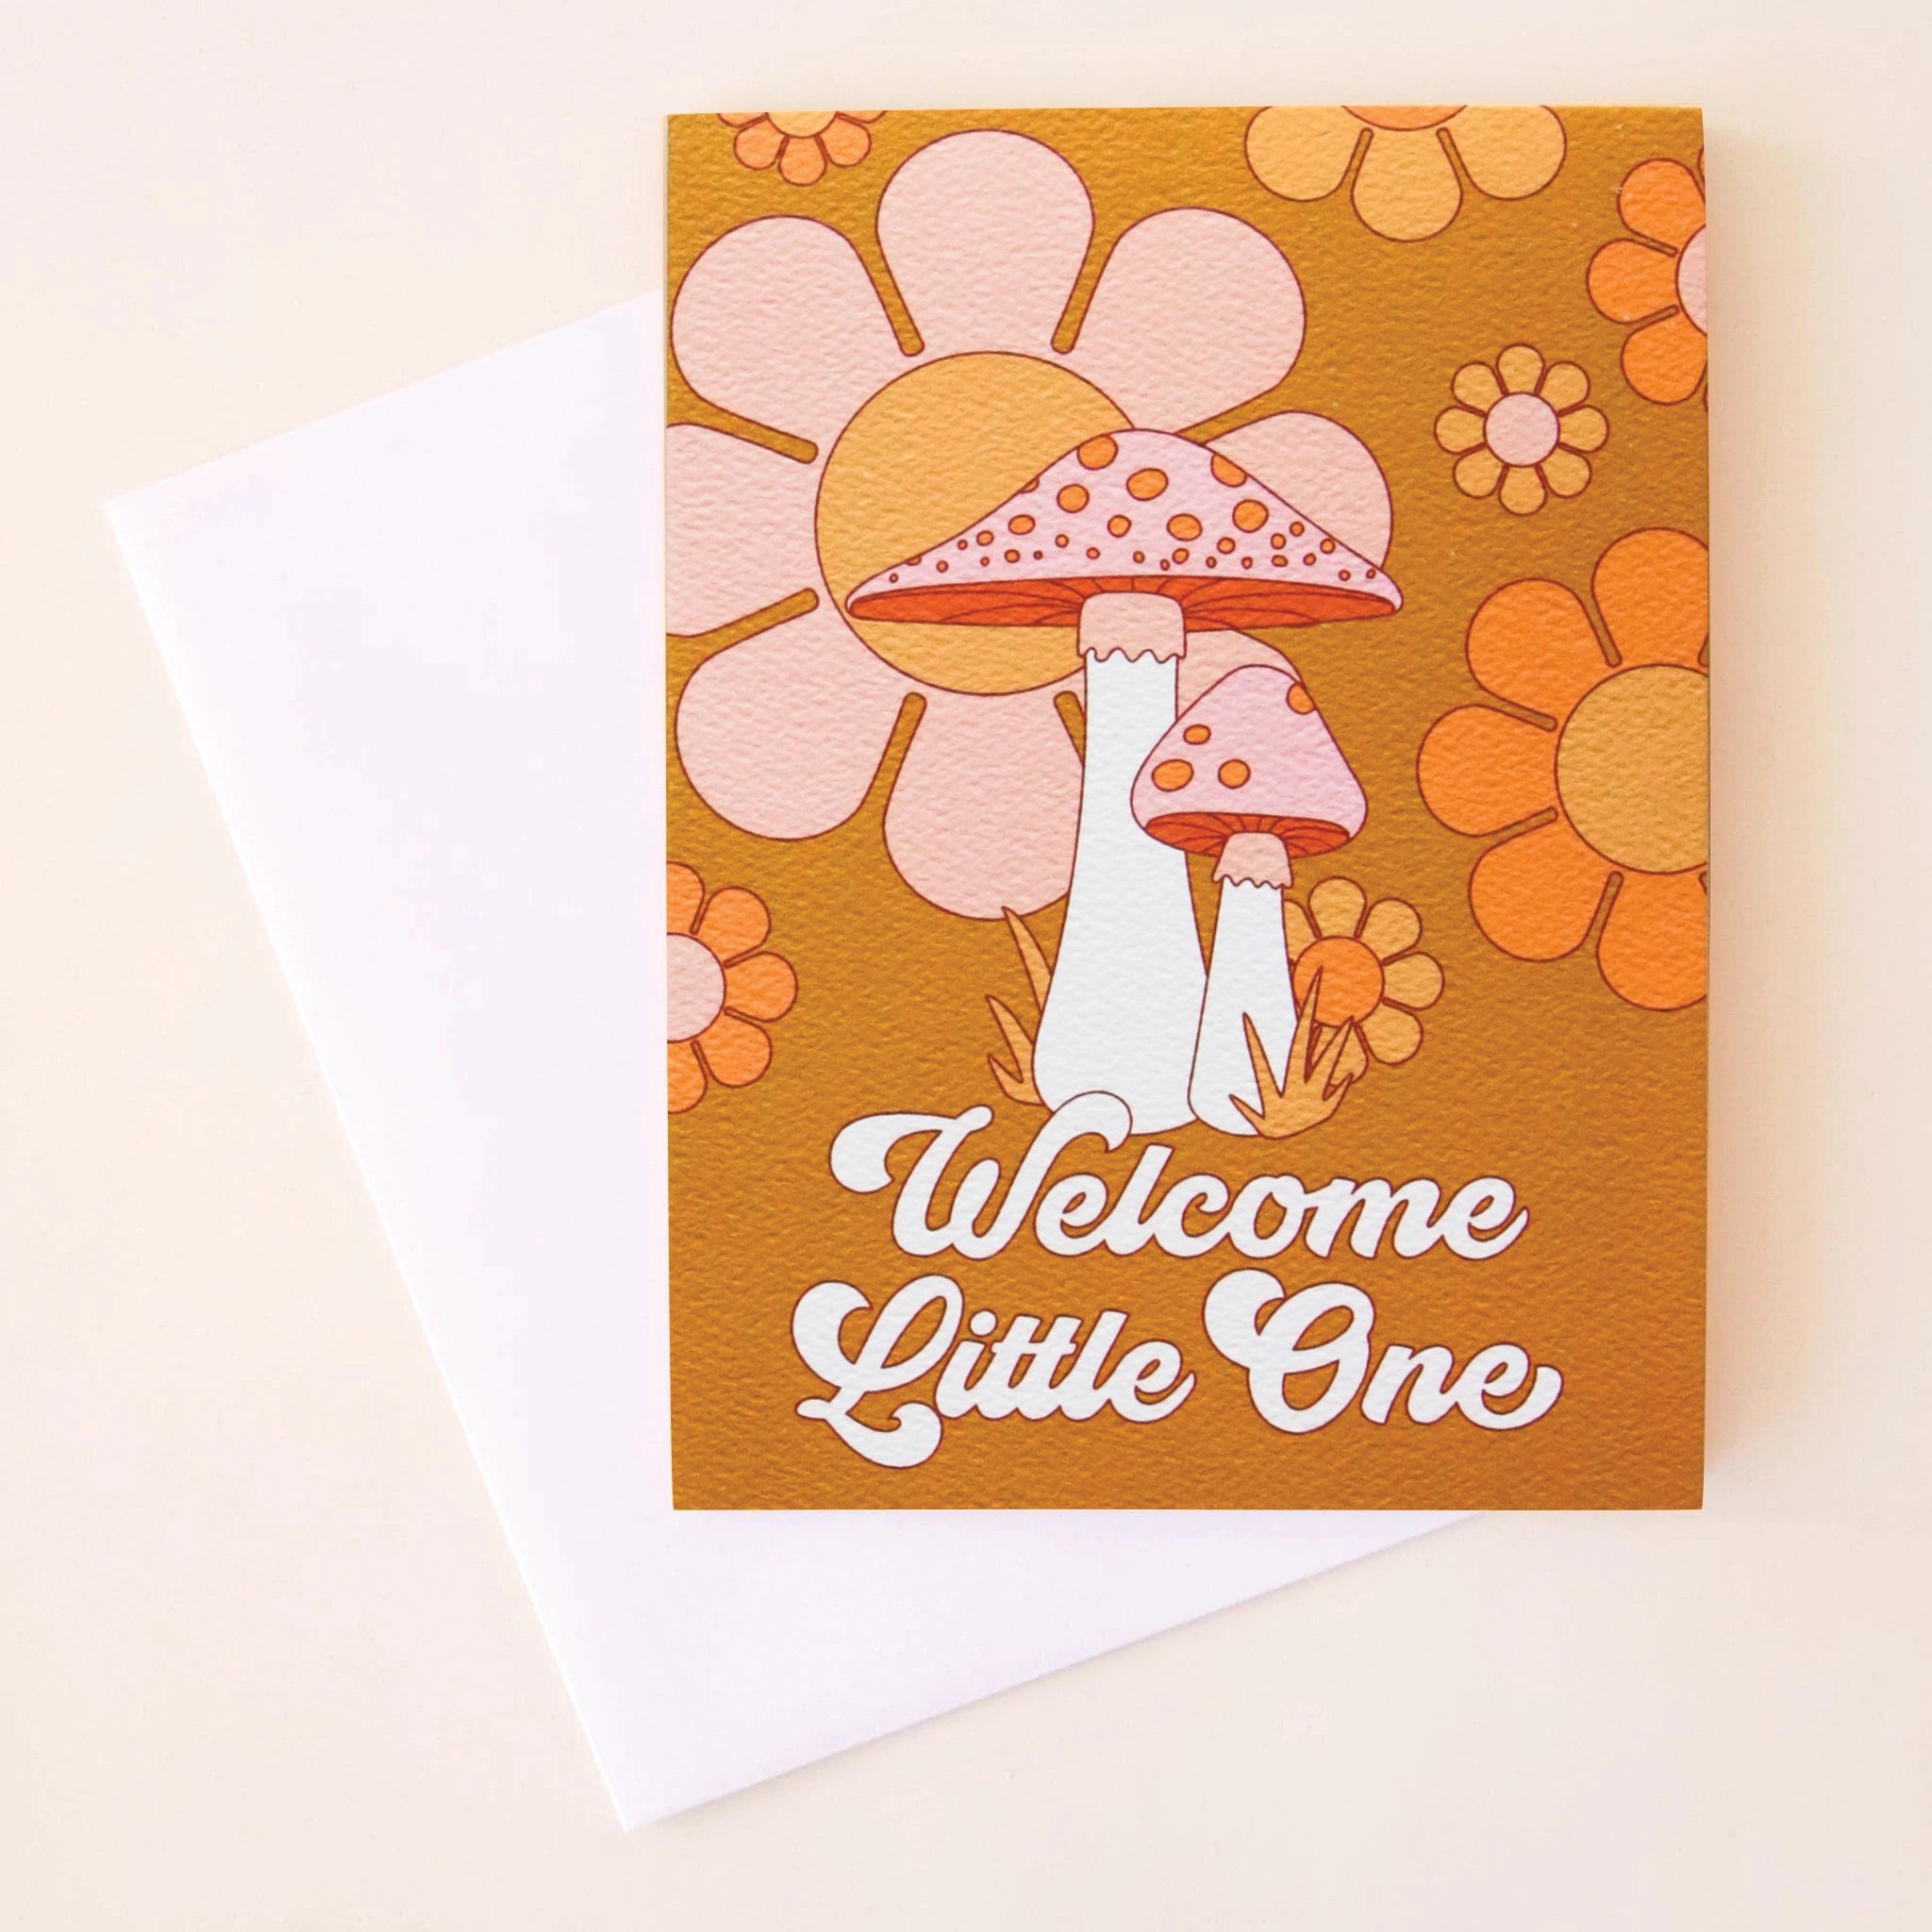 On a cream background is an orange card with a floral and mushroom design along with white text that reads, "Welcome Little One".